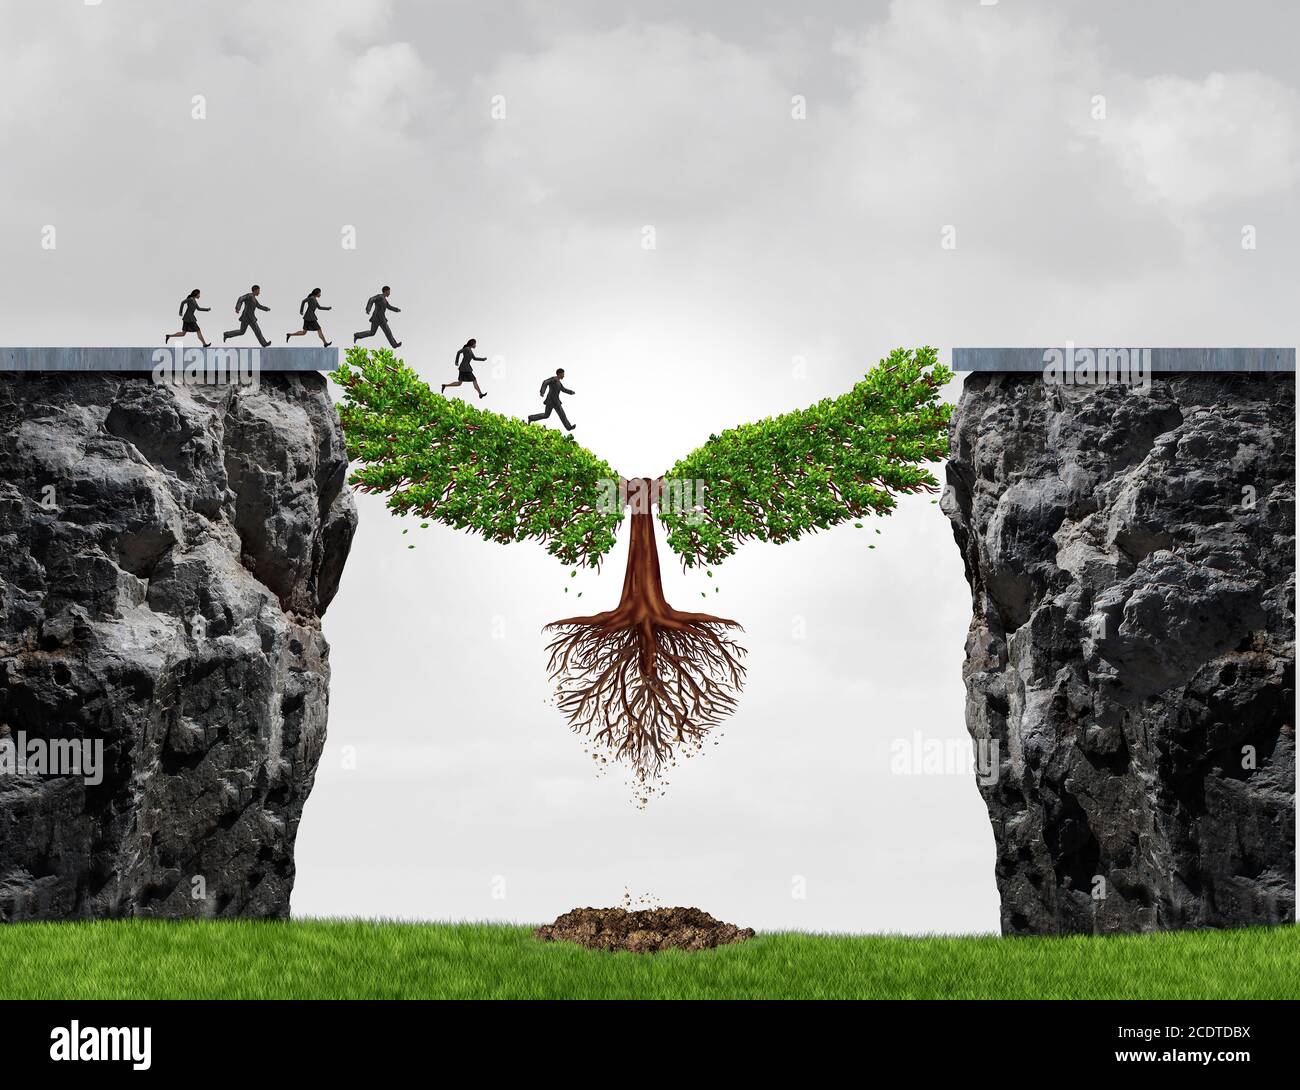 Overcome adversity as a business concept with a group of people running from one cliff to another with the help of a tree for bridging the gap. Stock Photo